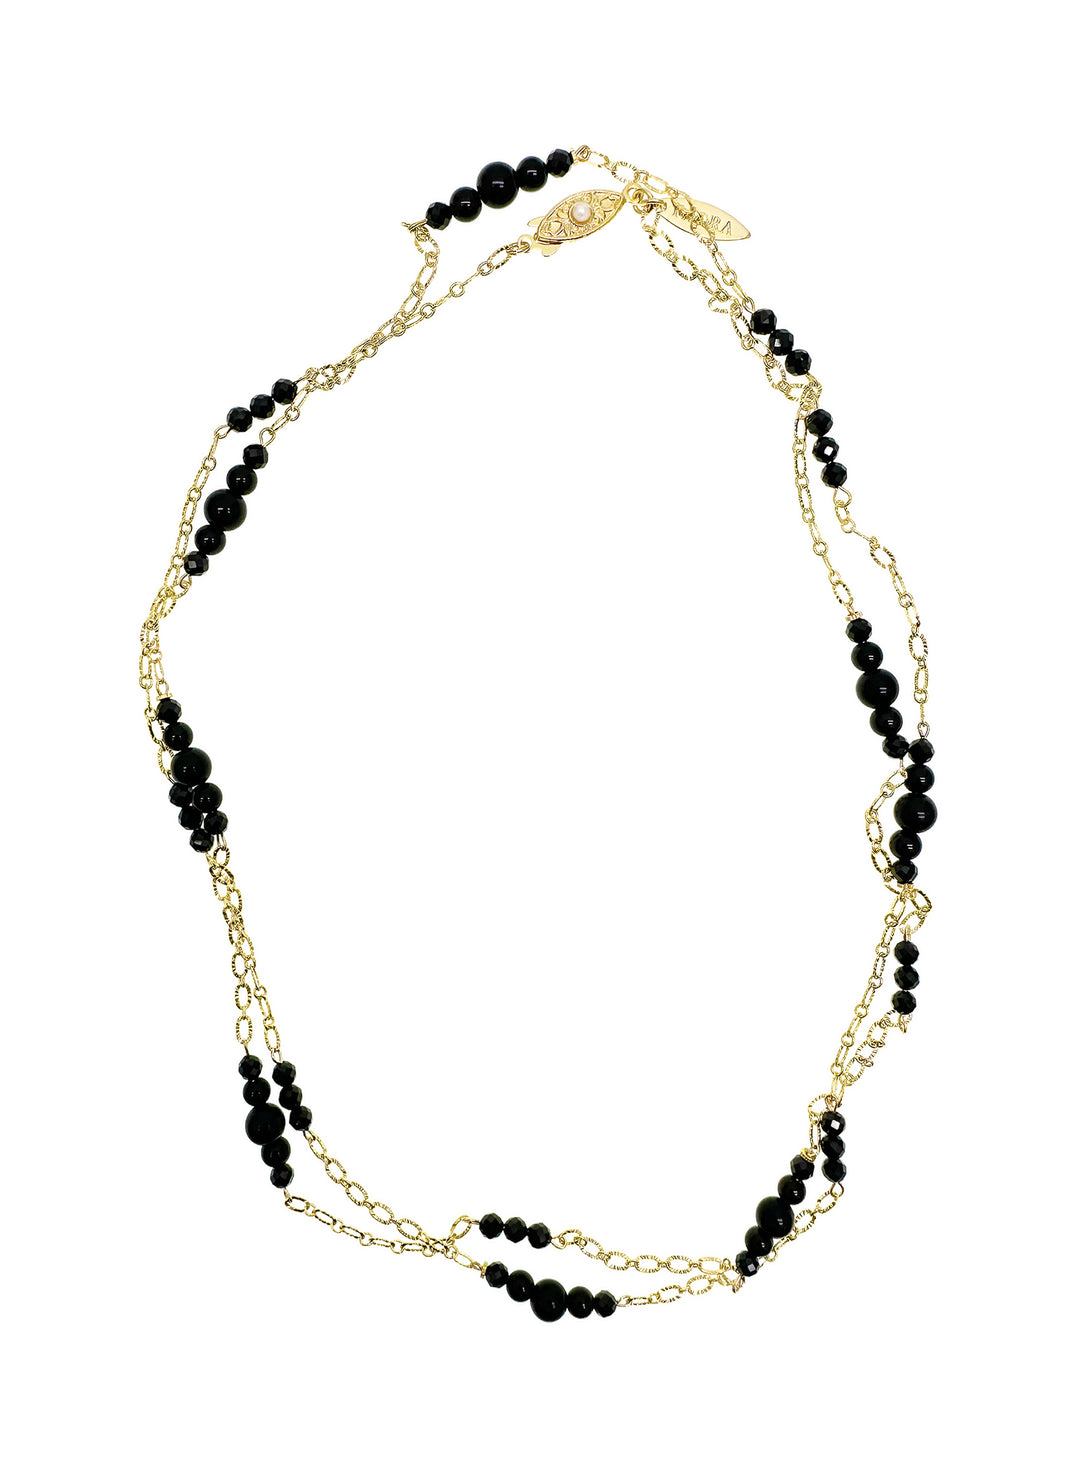 Gold Chain with Black Obsidian Long Necklace LN073 - FARRA